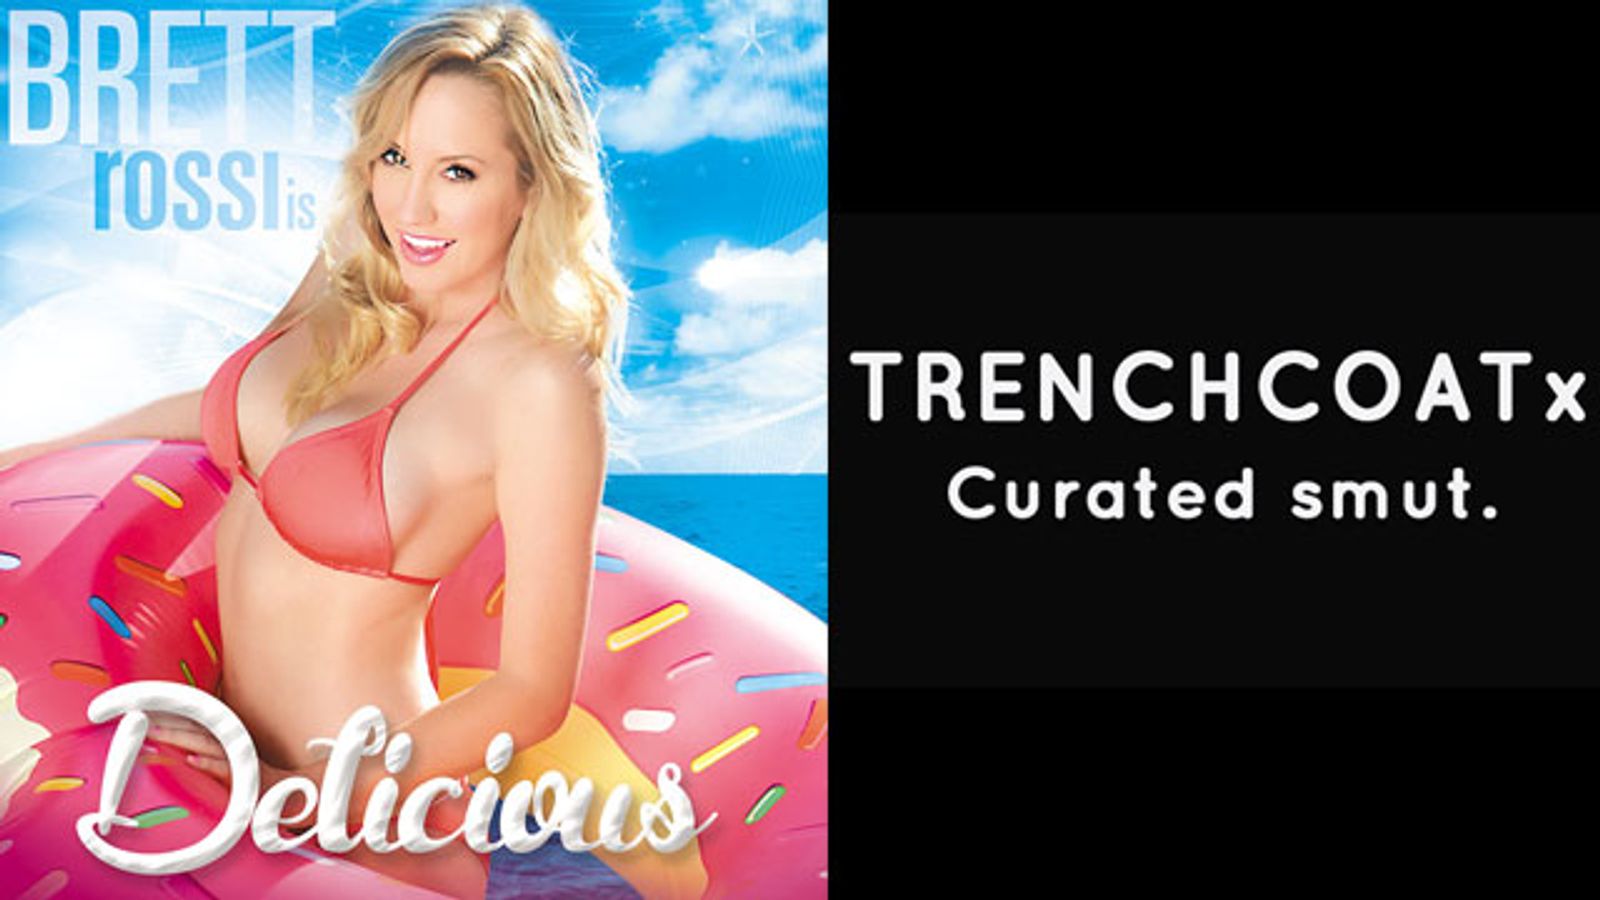 Brett Rossi Signs Boy/Girl Contract With Trenchcoatx